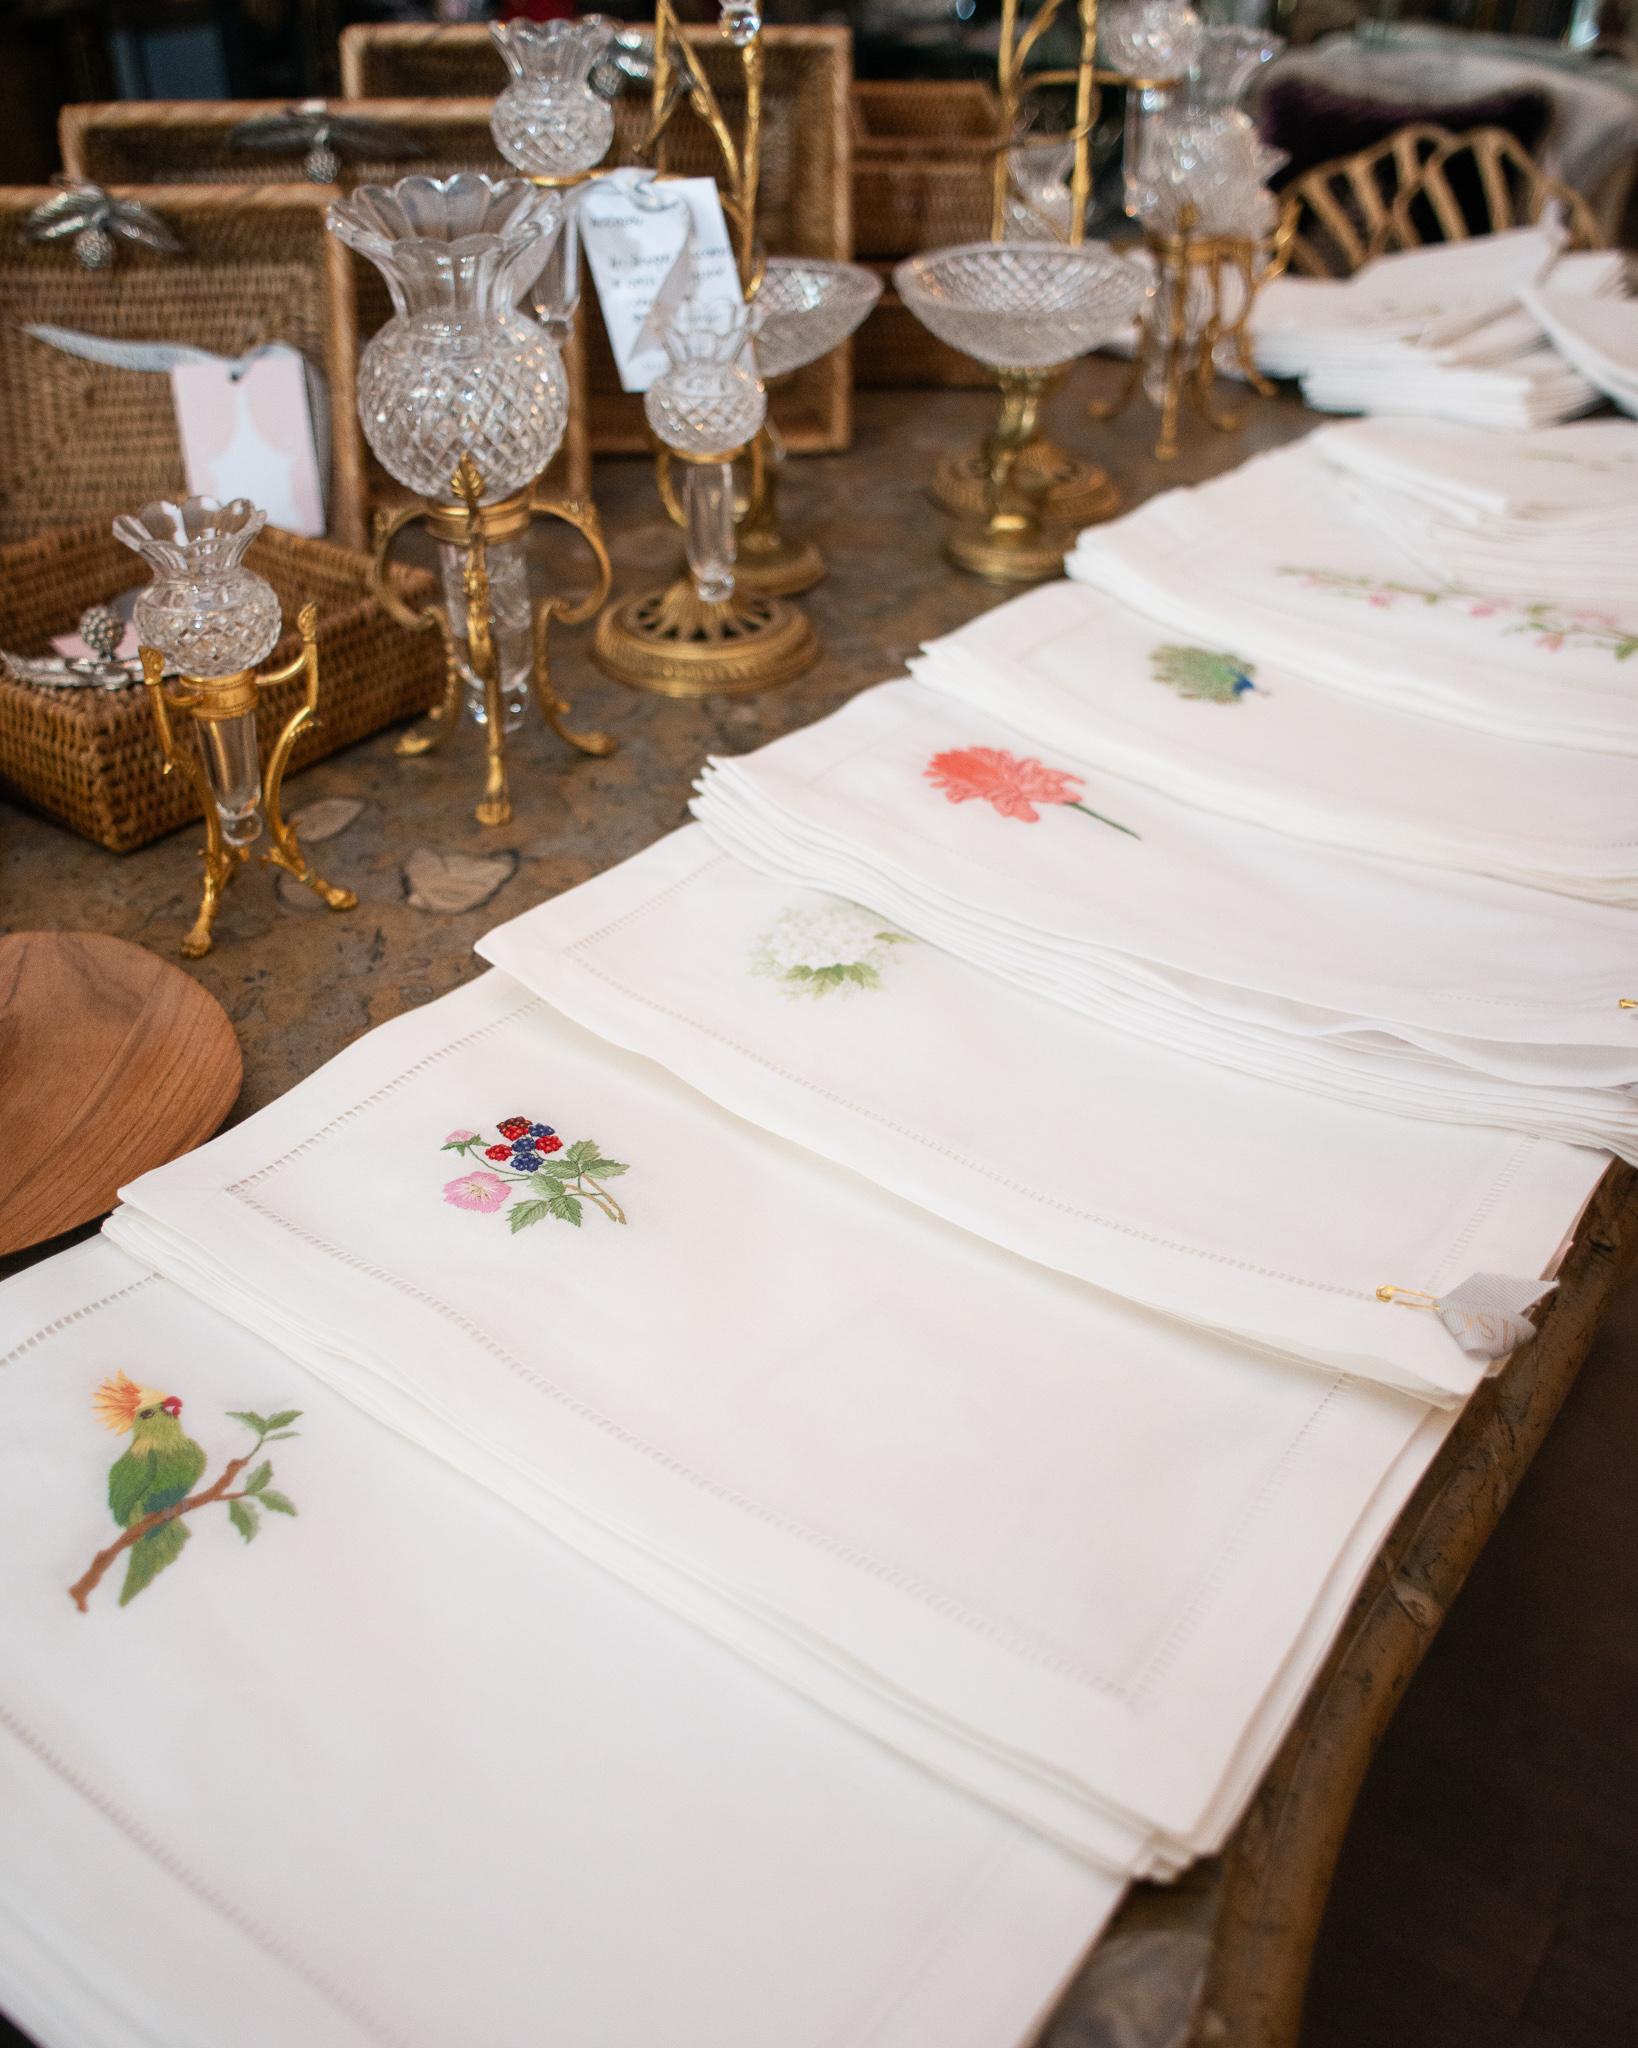 A stunning set of 12 hand embroidered linen placemats, made by hand in Portugal and embroidered with mimosa flowers. A unique blend of timeless European inspiration and Classic design expressed in the finest materials and finishes. Operating since